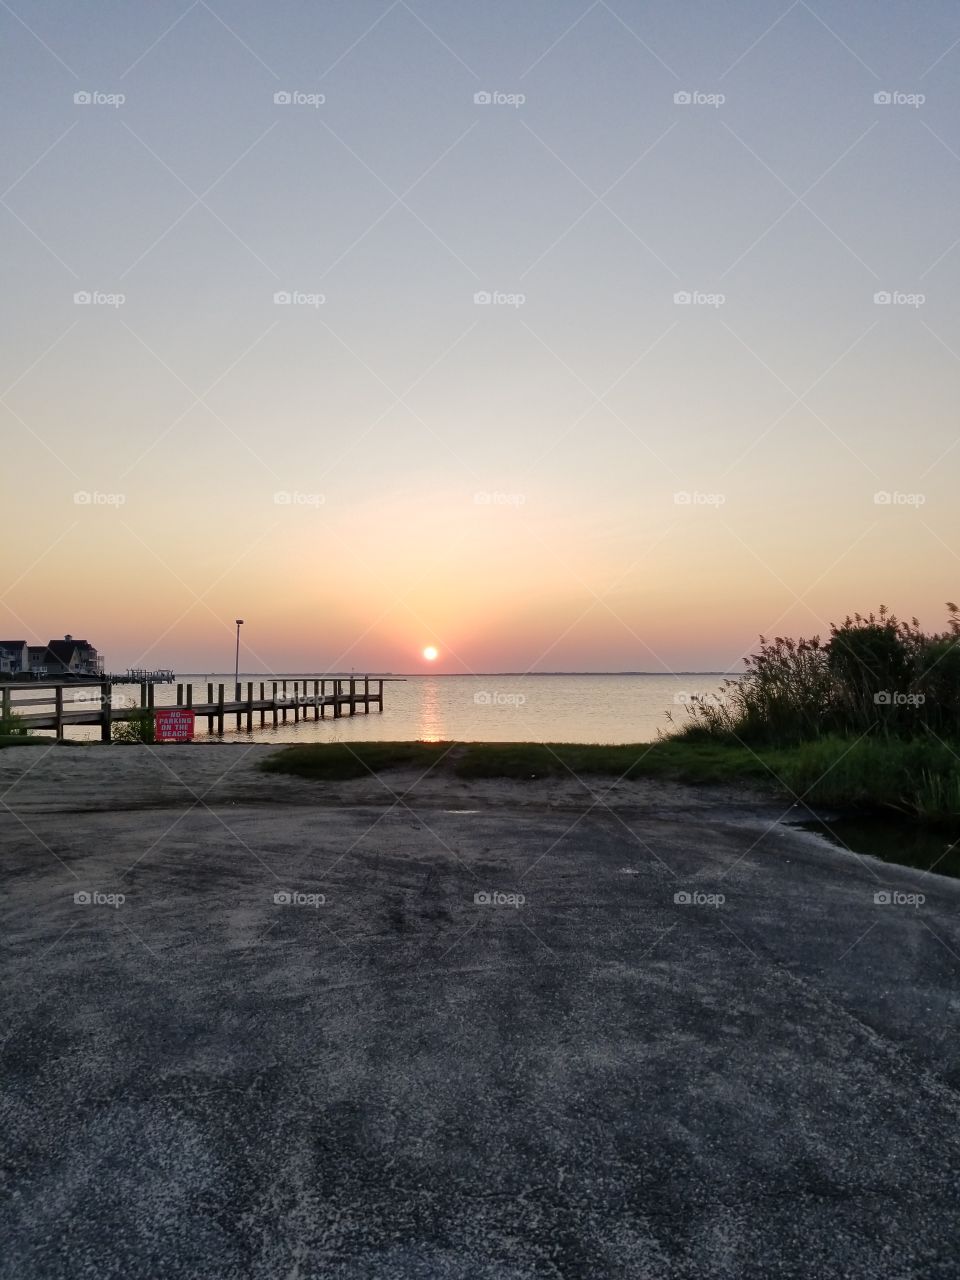 The Sun rising at the pier in Bayville N J